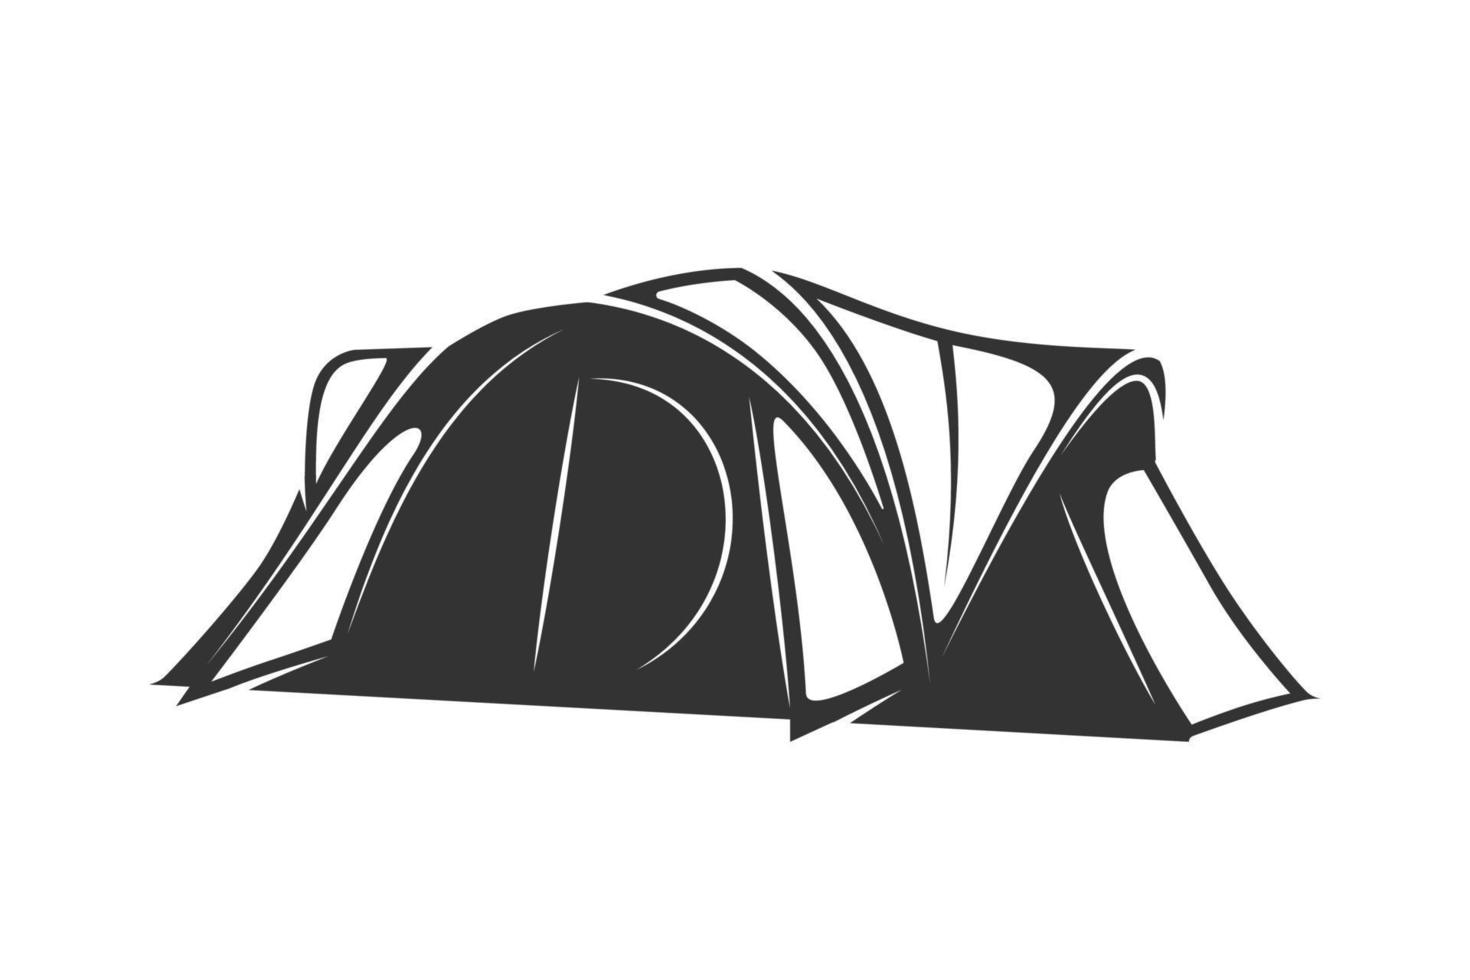 Tent isolated on white background vector